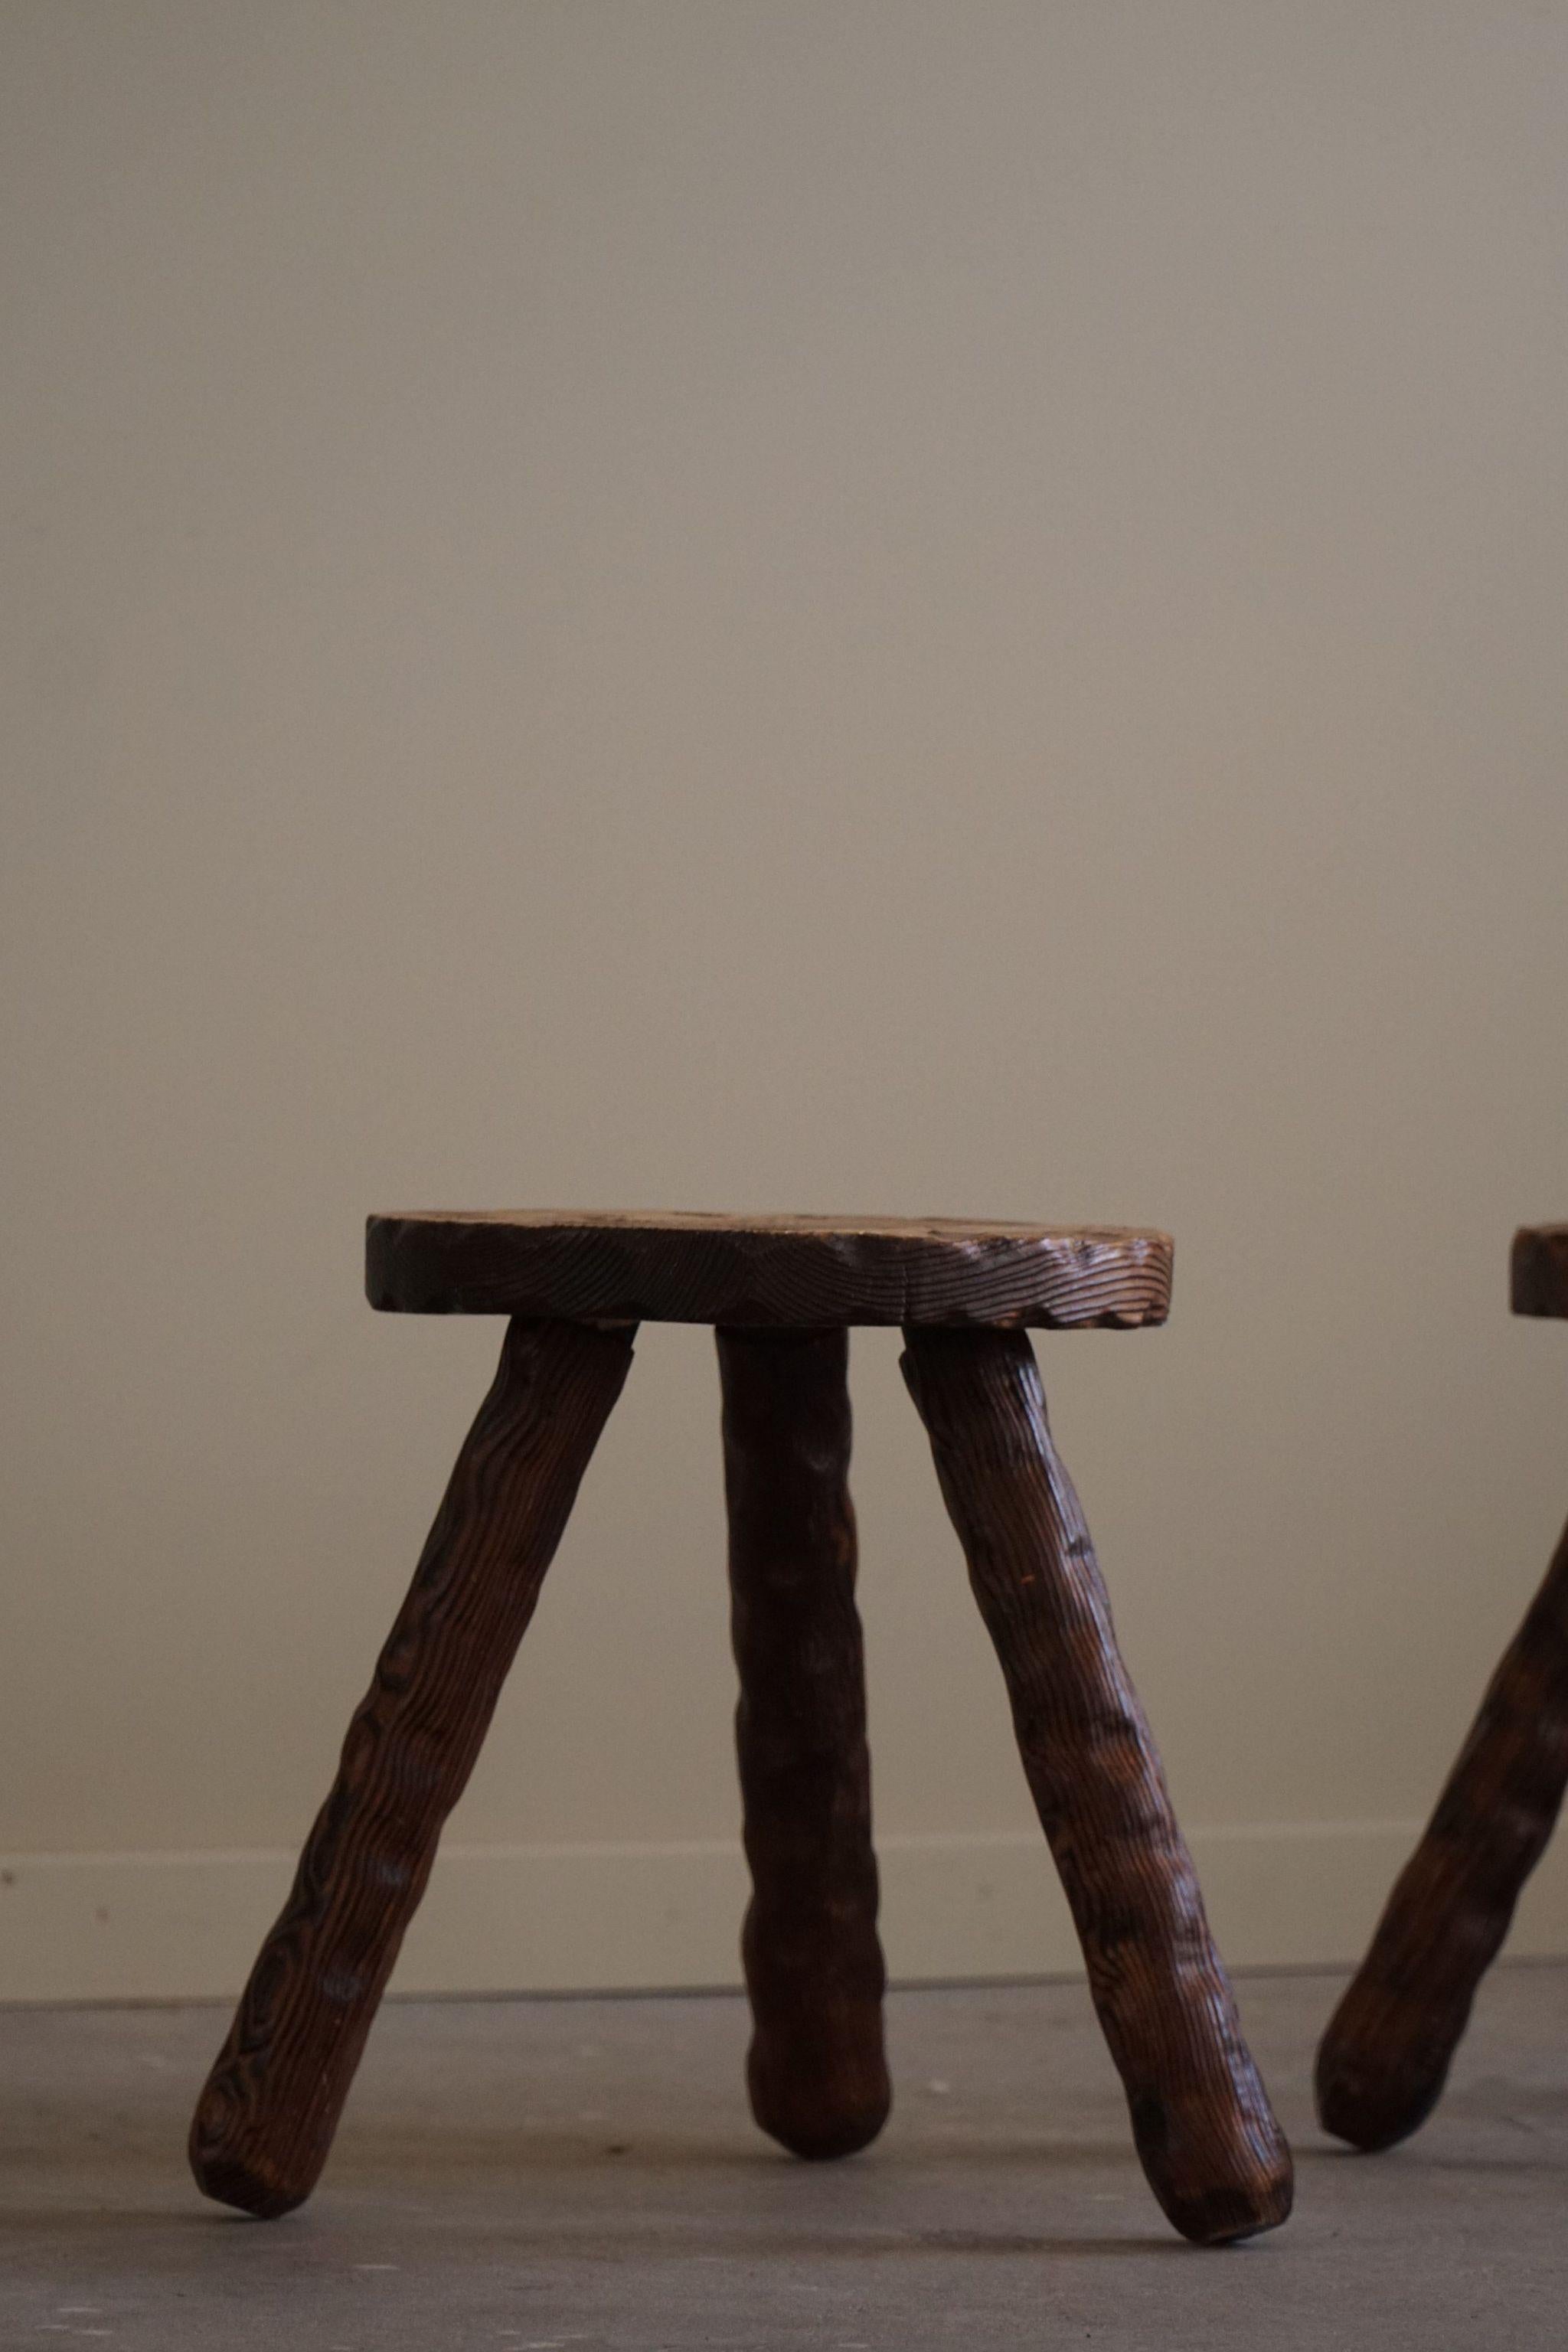 A Pair of Carved Wabi Sabi Stools in Pine, Swedish Mid Century Modern, 1960s For Sale 3